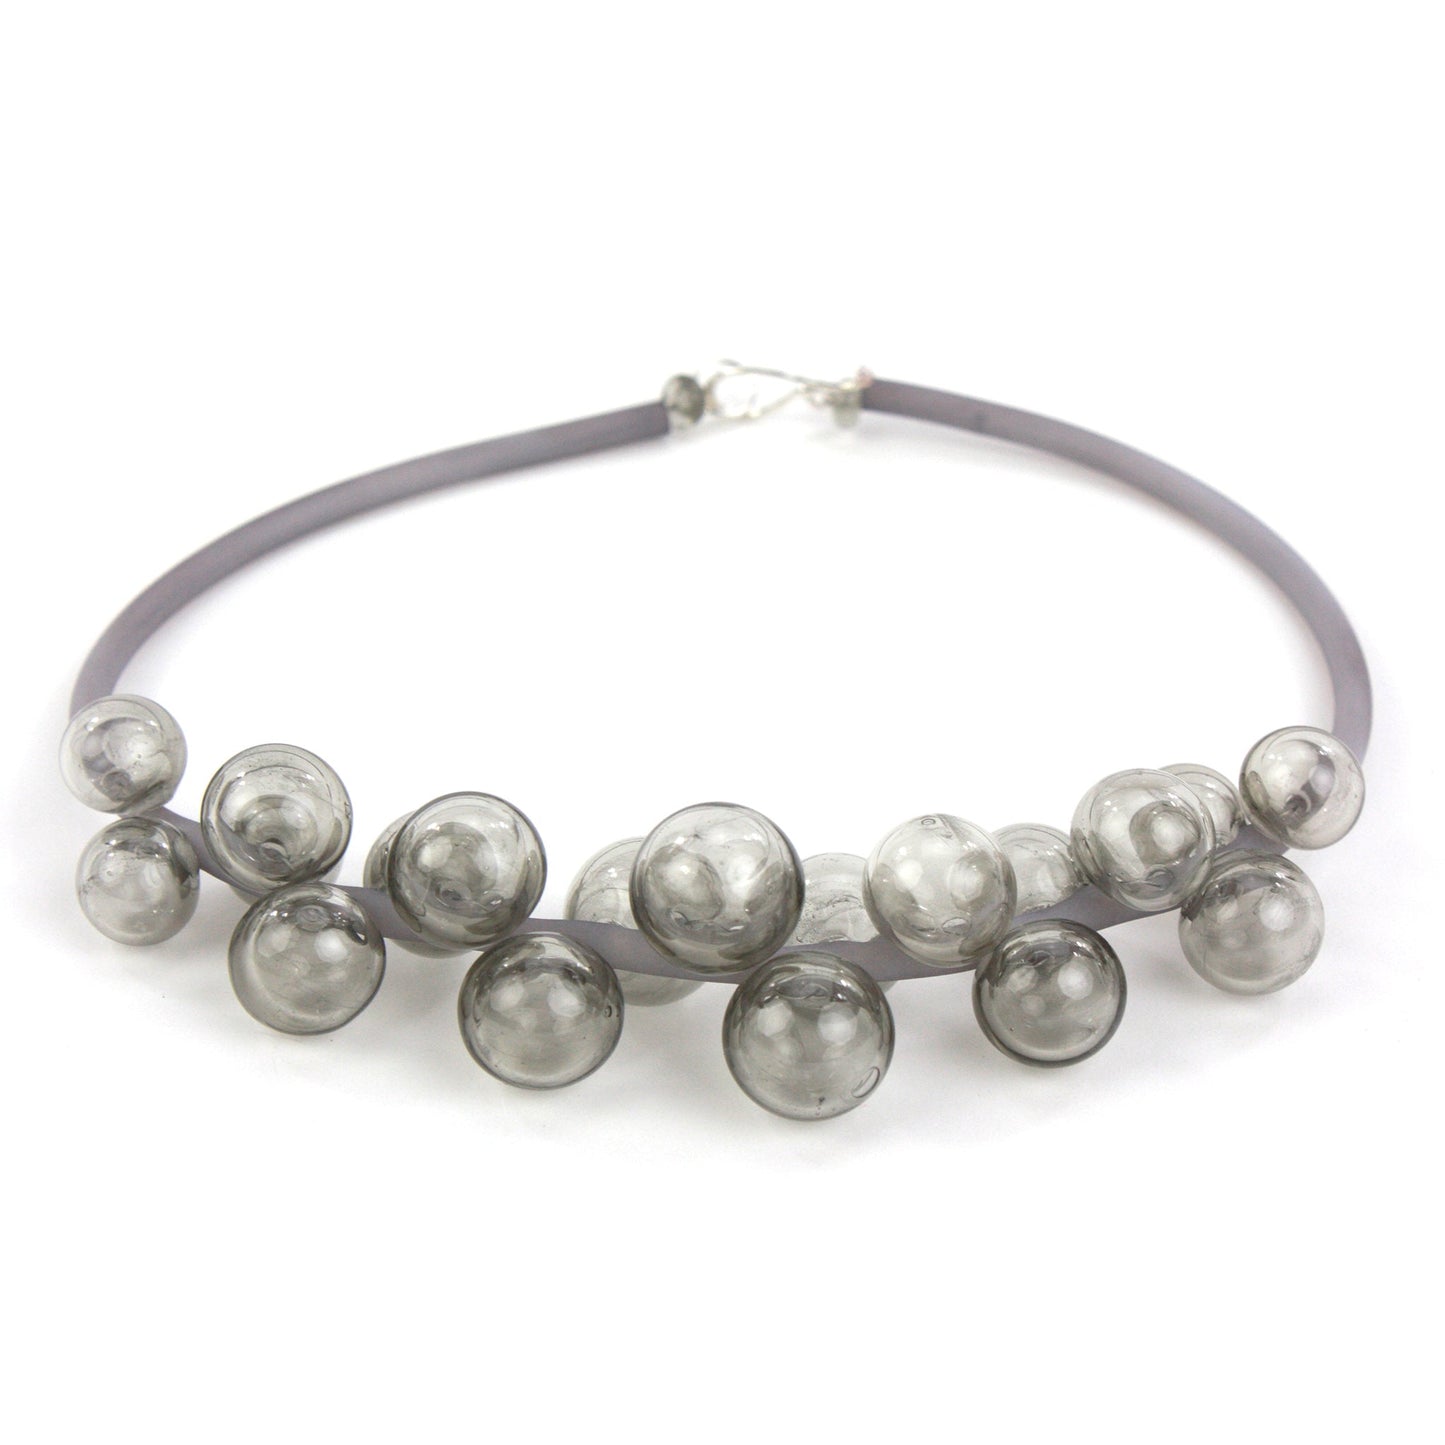 Chroma Bolla Necklace in Grey